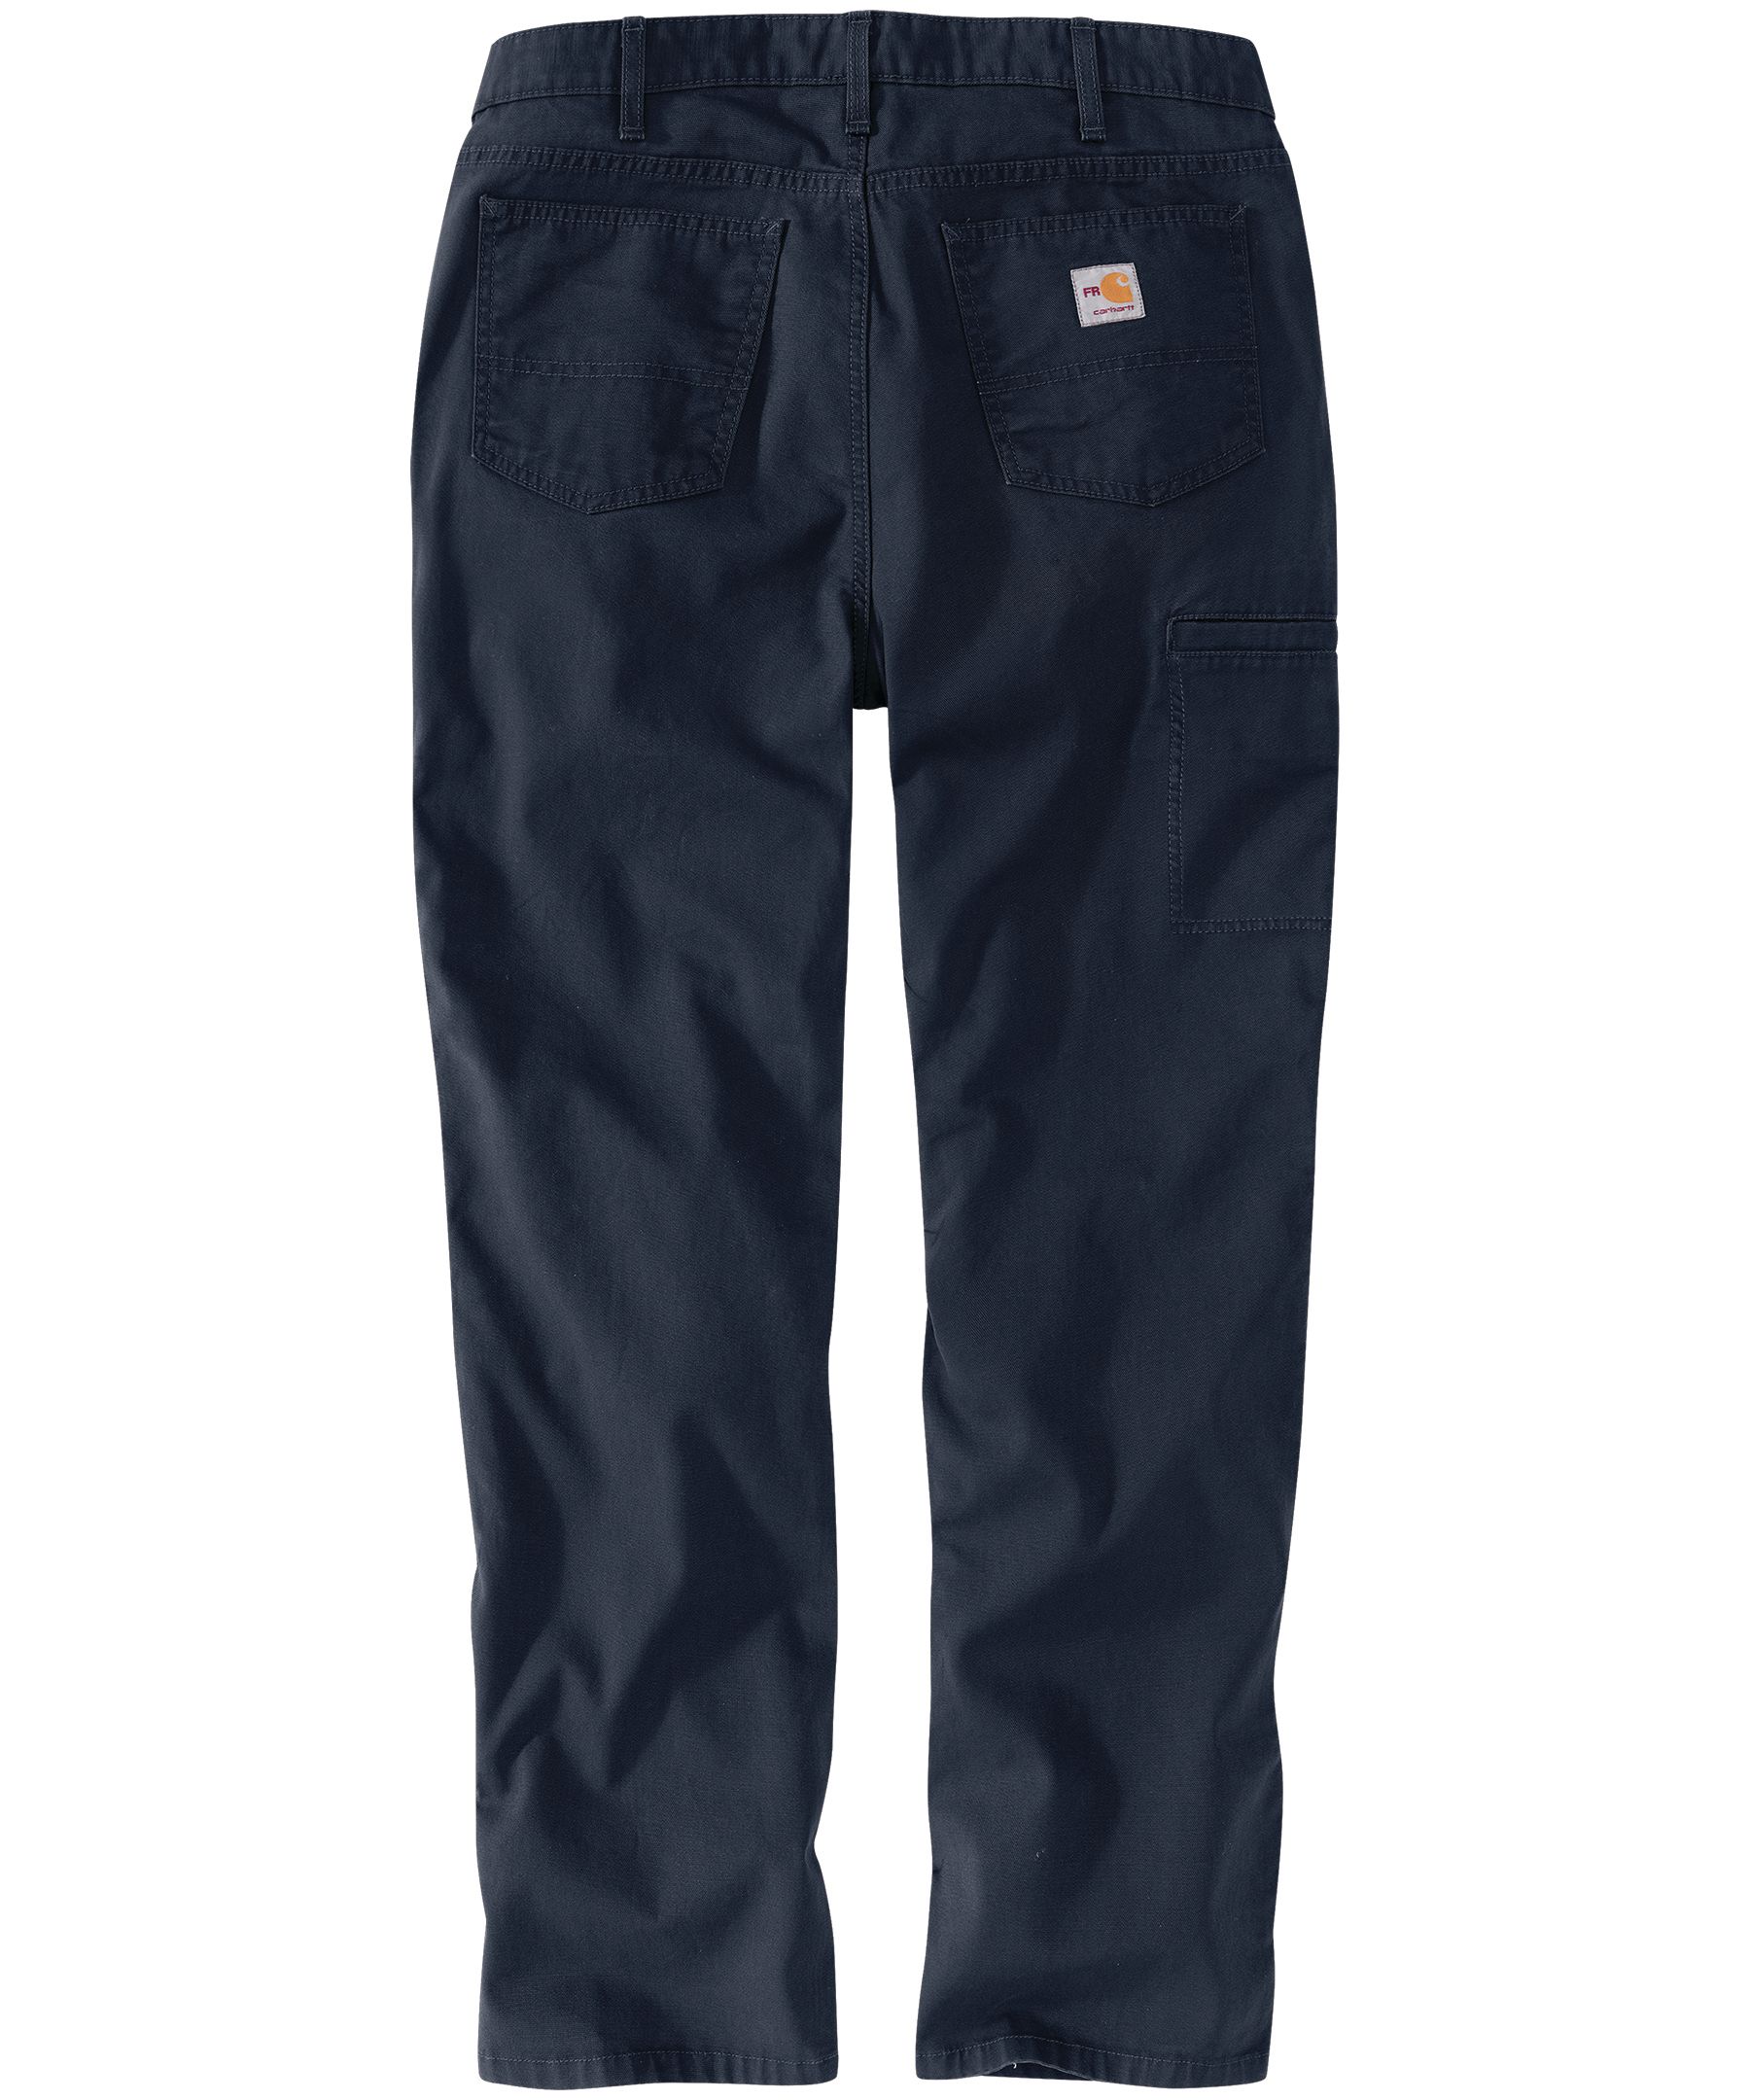 Carhartt Women's Women's Canvas Work Pant - Relaxed Fit Rugged